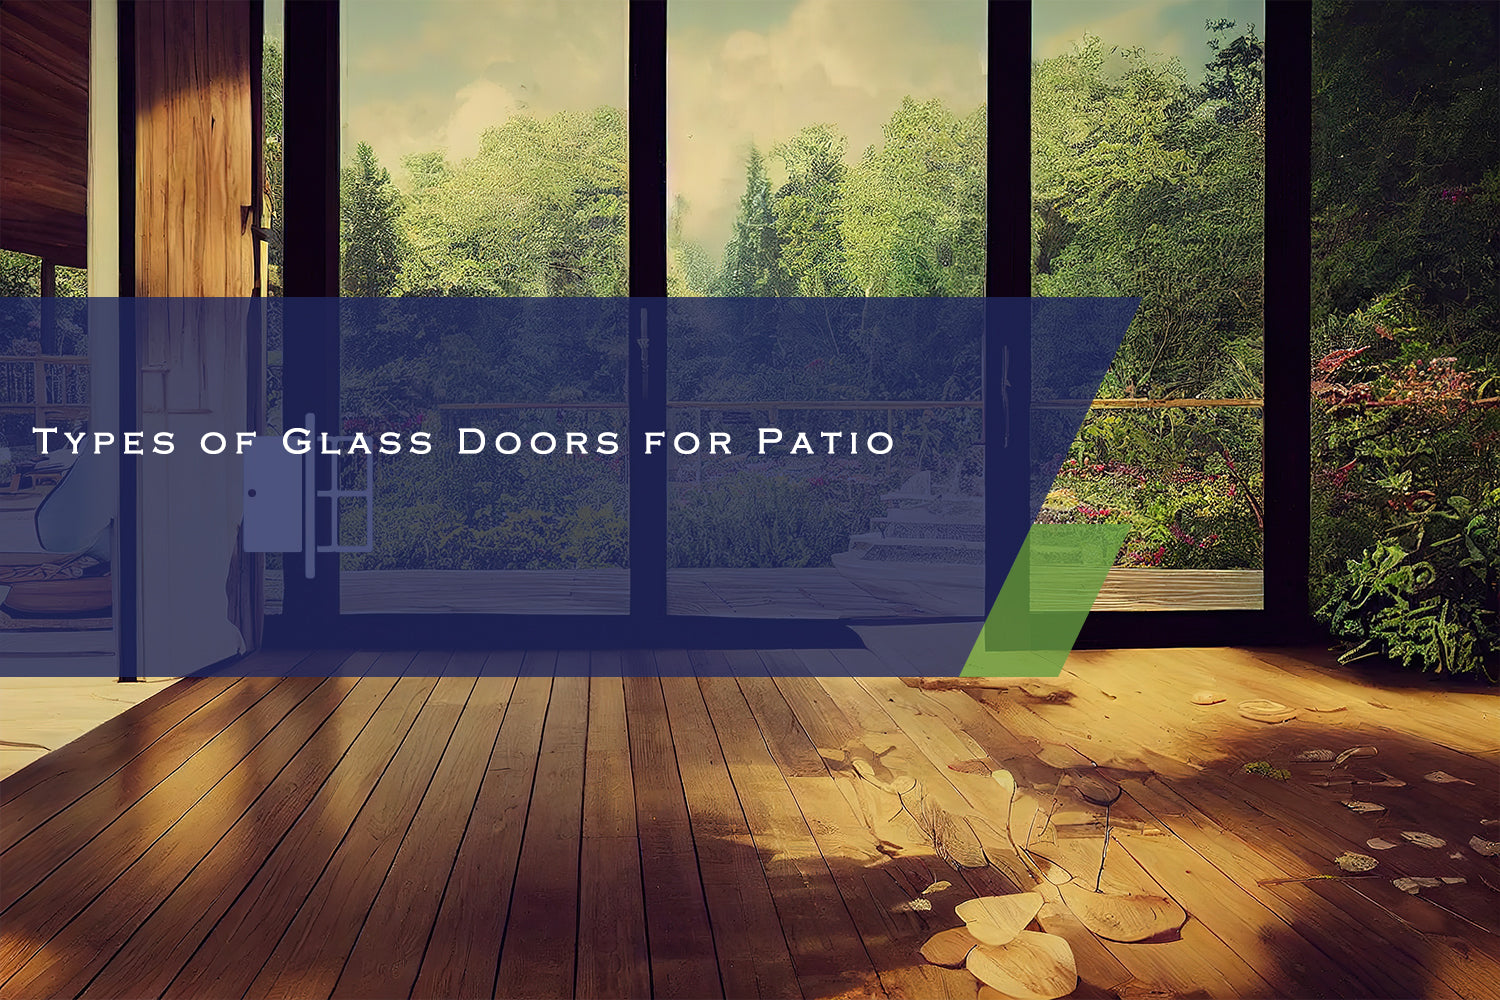 Types of Glass Doors for Patio